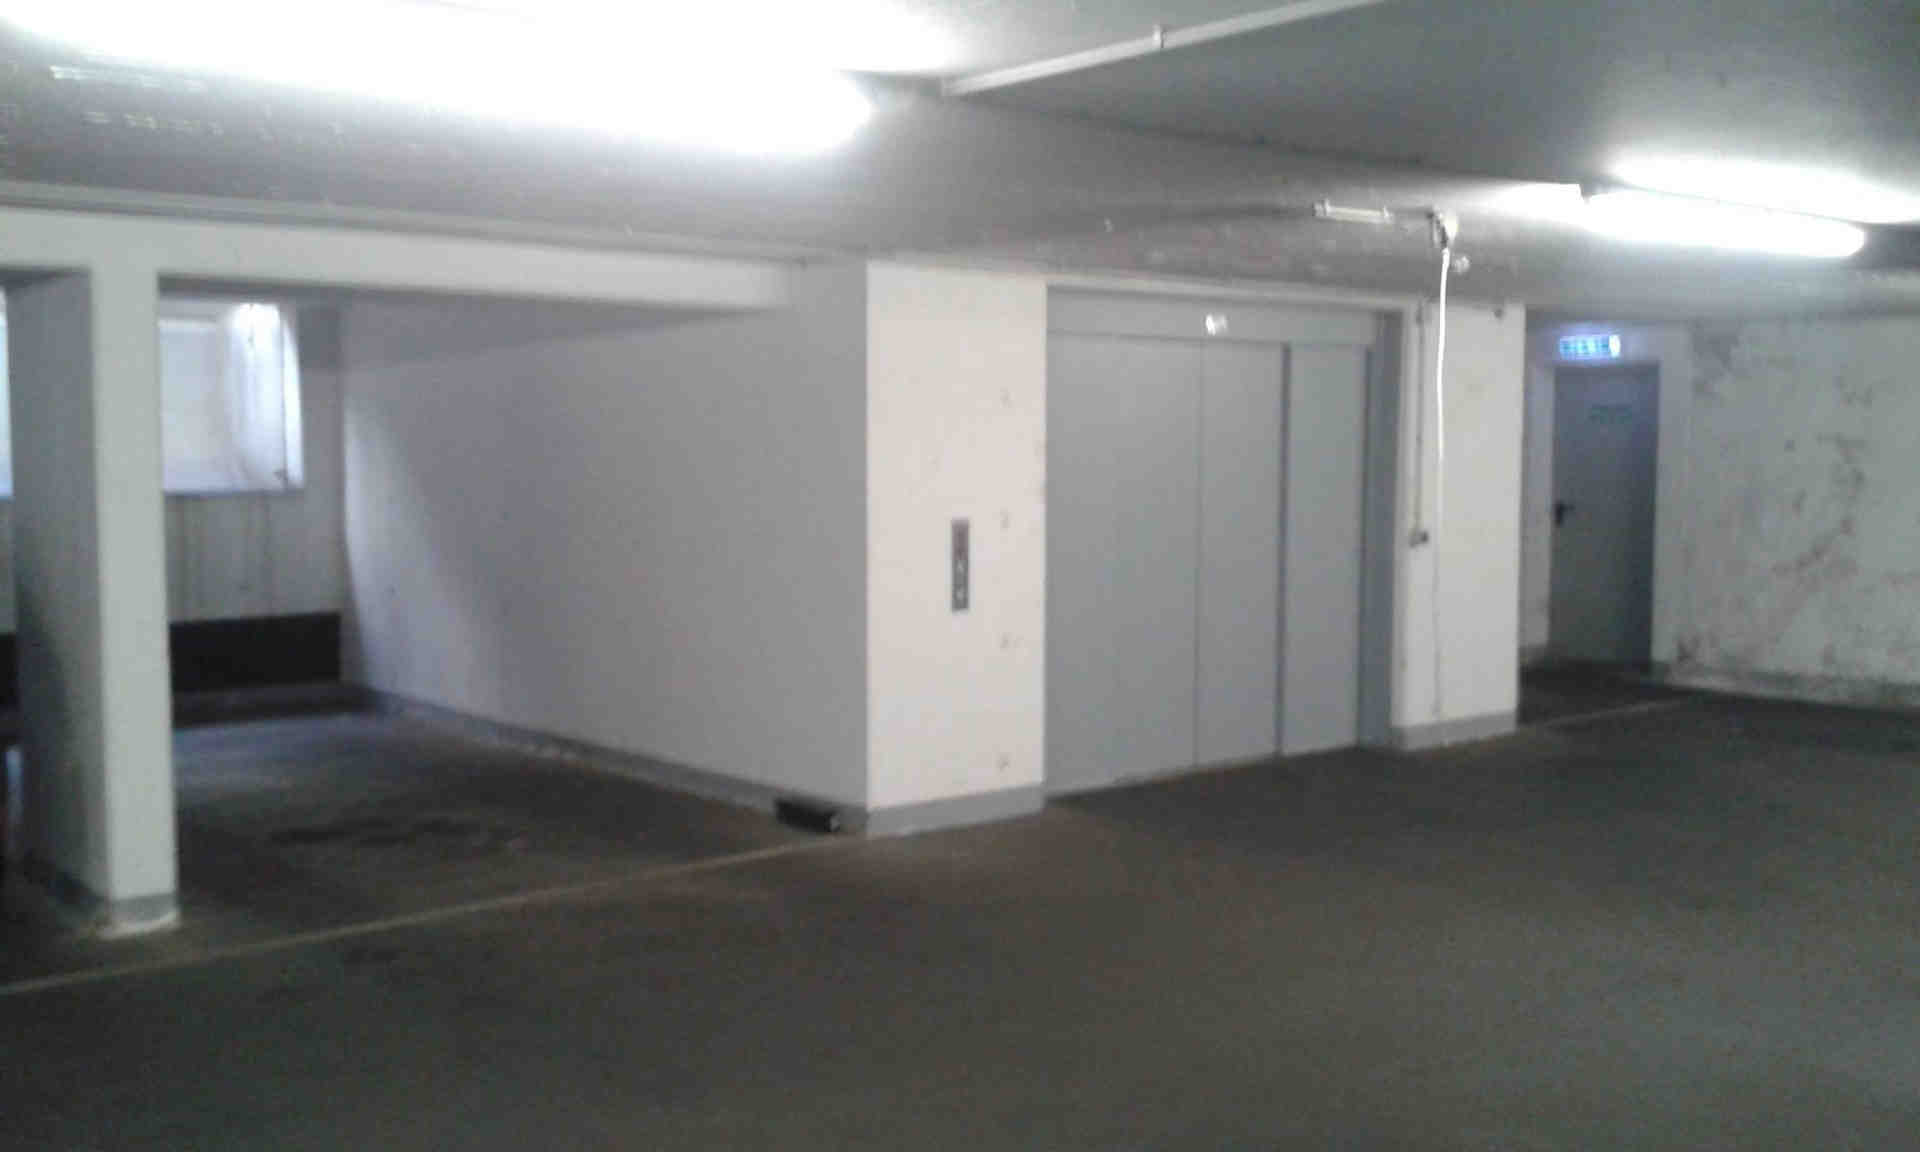 Parking space/garage in the basement in Cologne city centre (Zülpi/Barba) - Mauritiuswall, 50676 Cologne - Photo 2 of 3